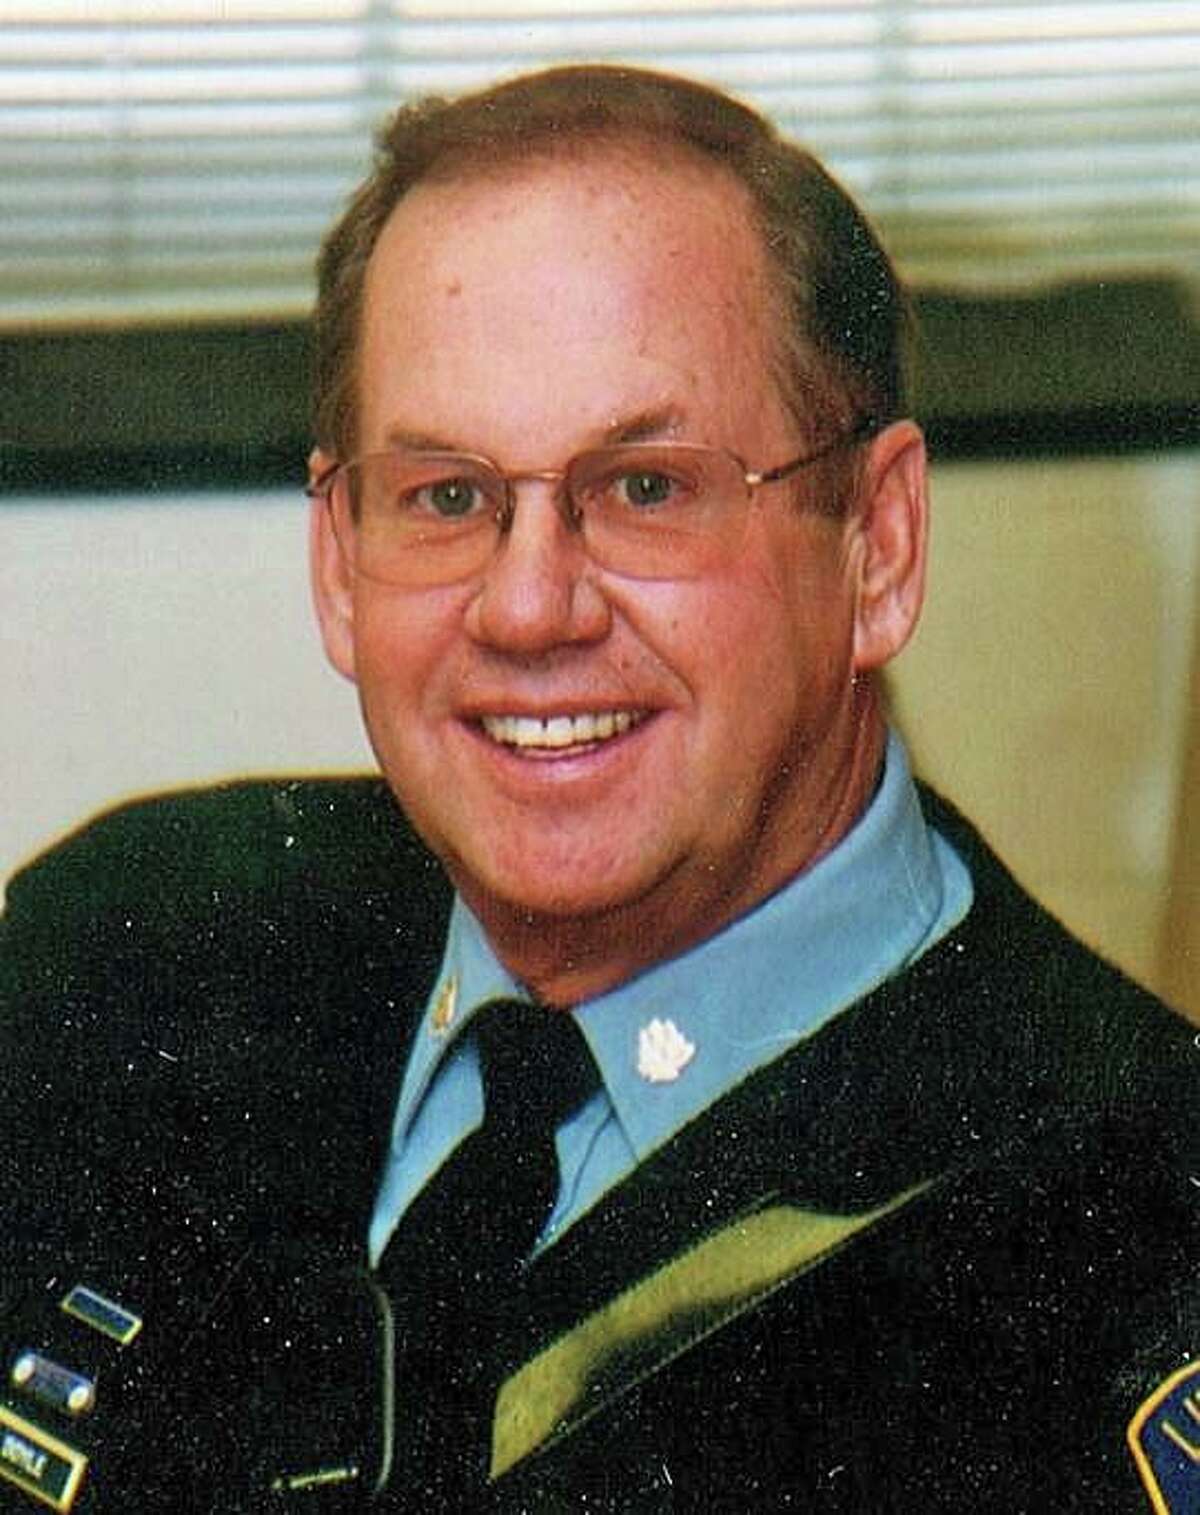 Police Corporal Roger “Dodgie” Doyle, the longtime town police department staple known for his personal style, has died, according to his family.